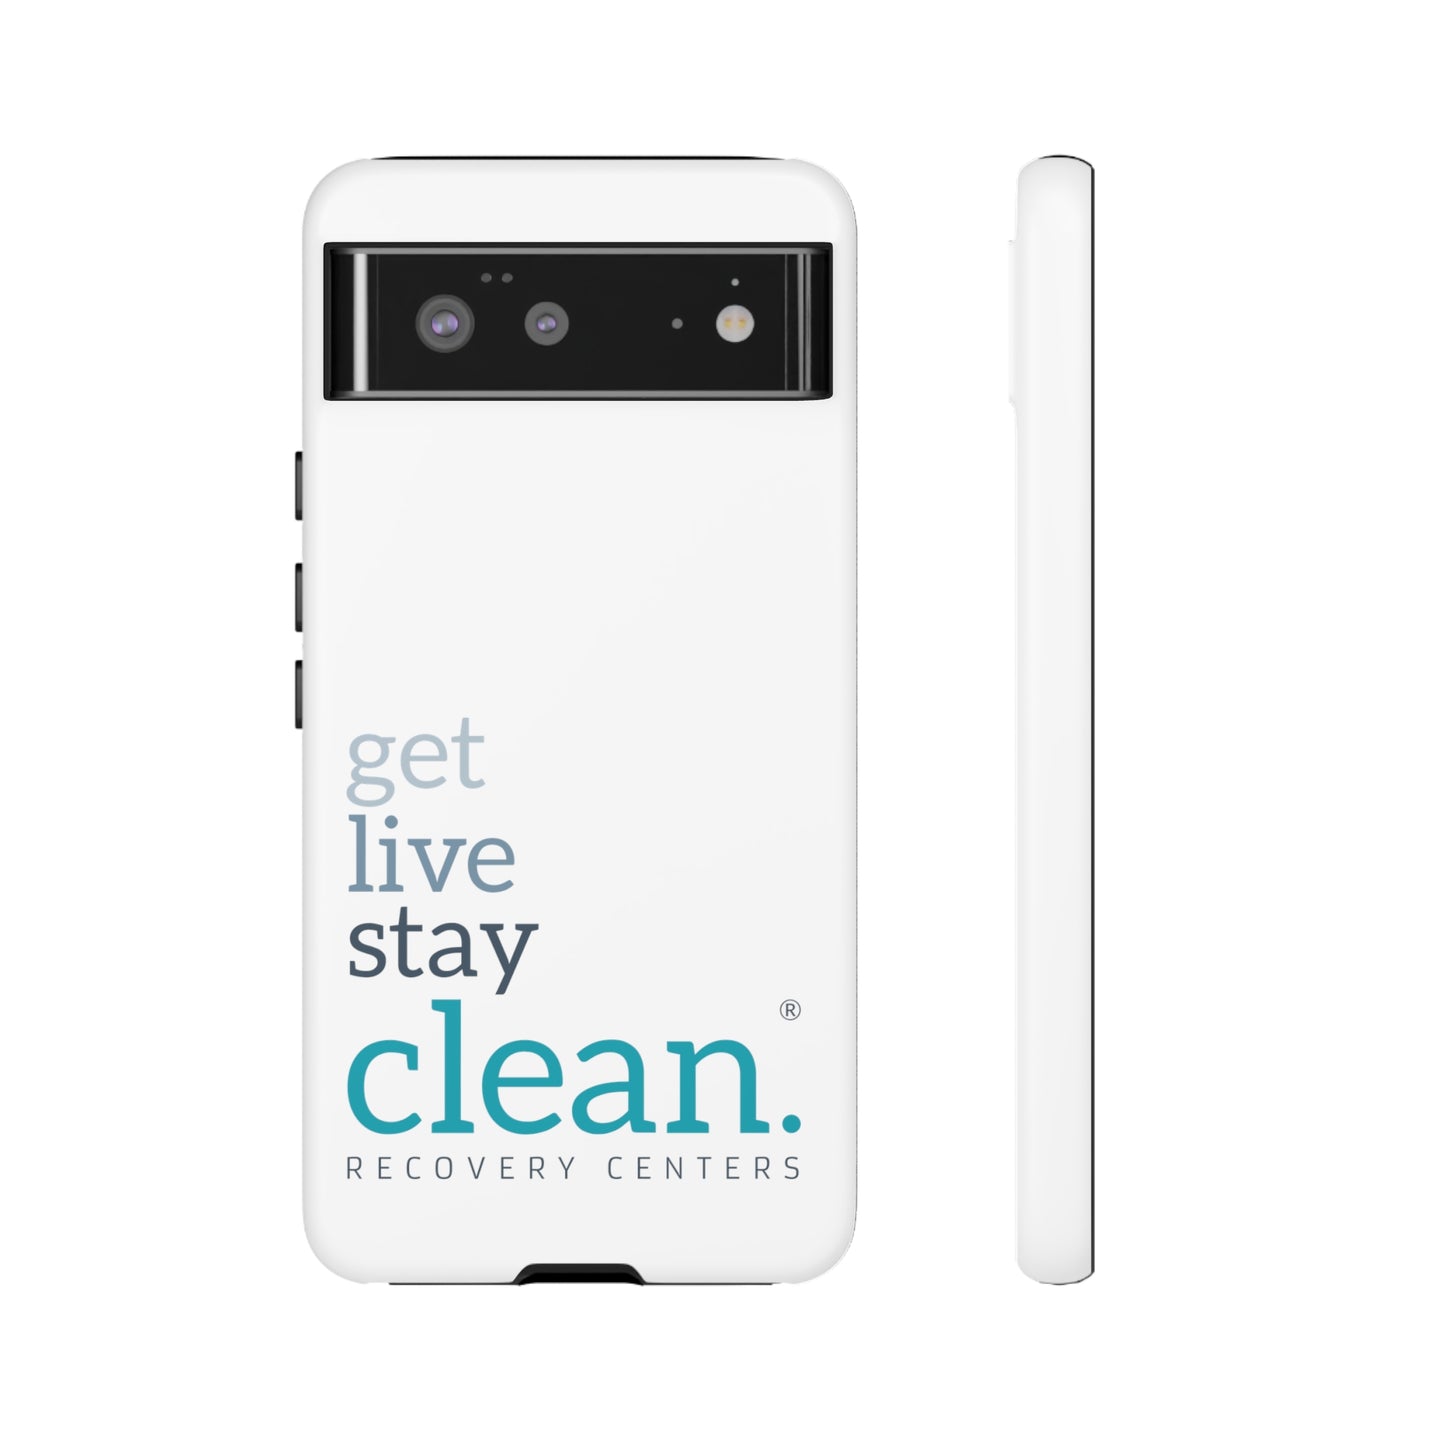 Get, Live, Stay Clean Tough Cases